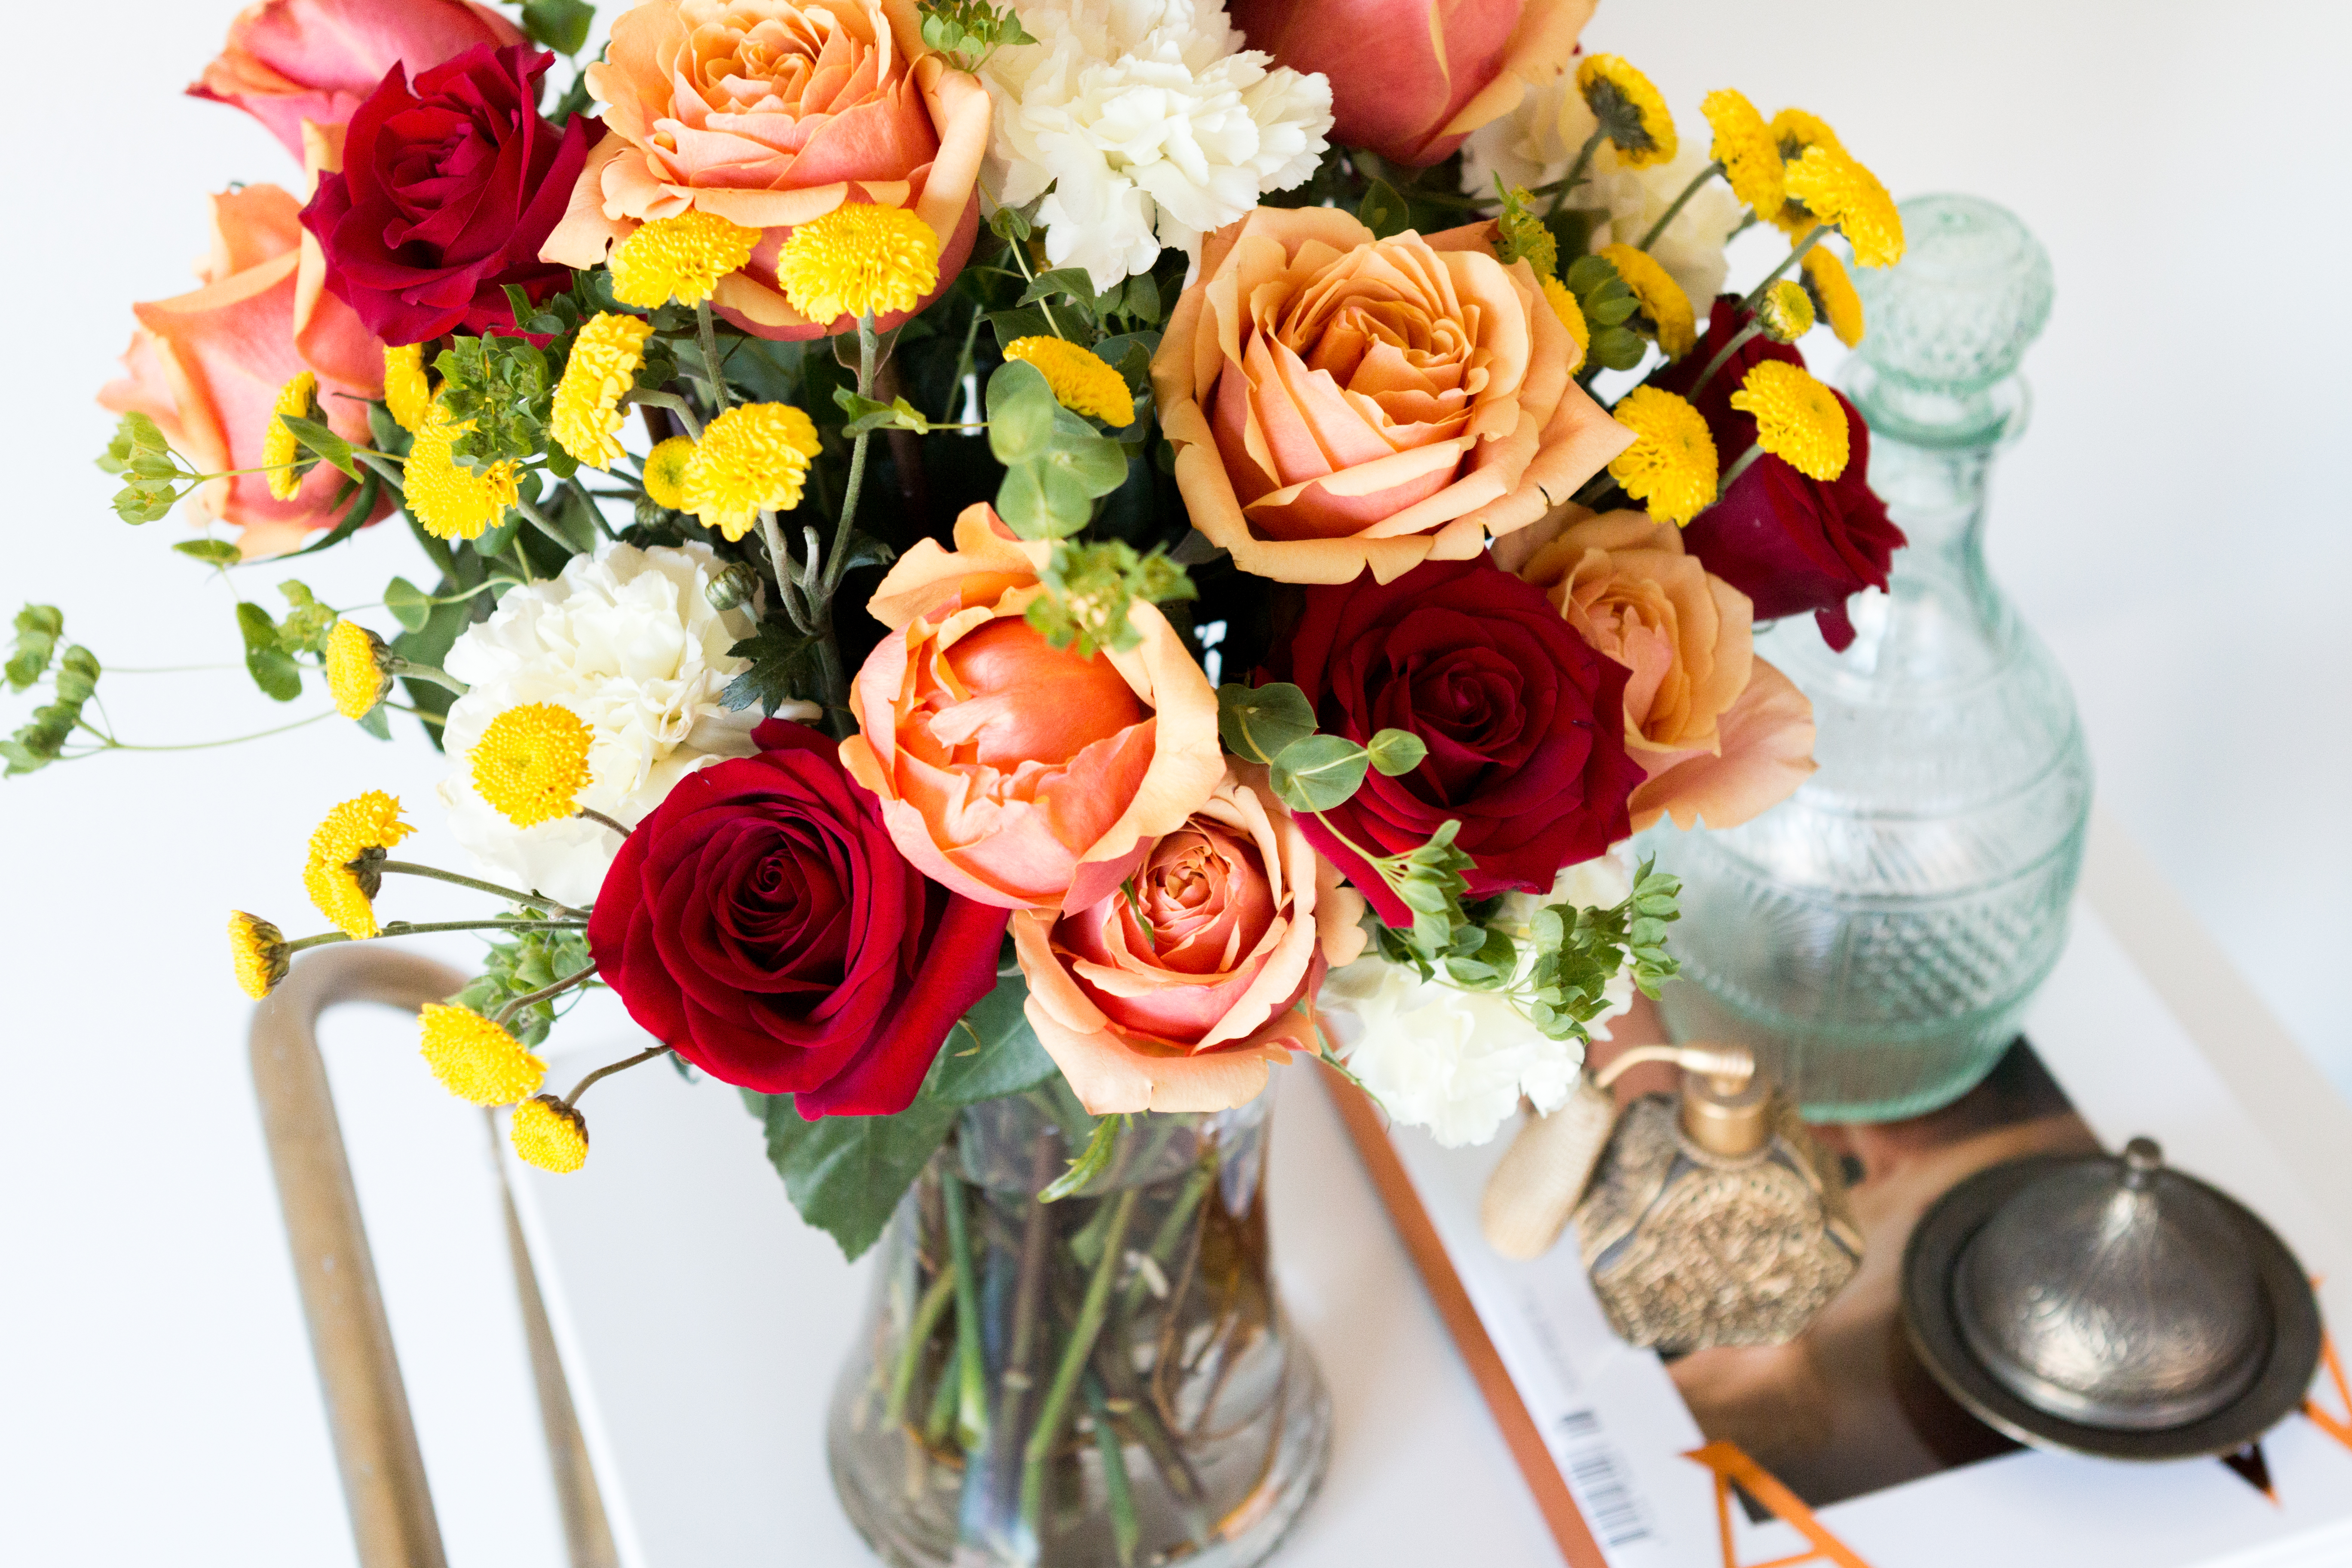 orange and red roses with yellow and white flowers